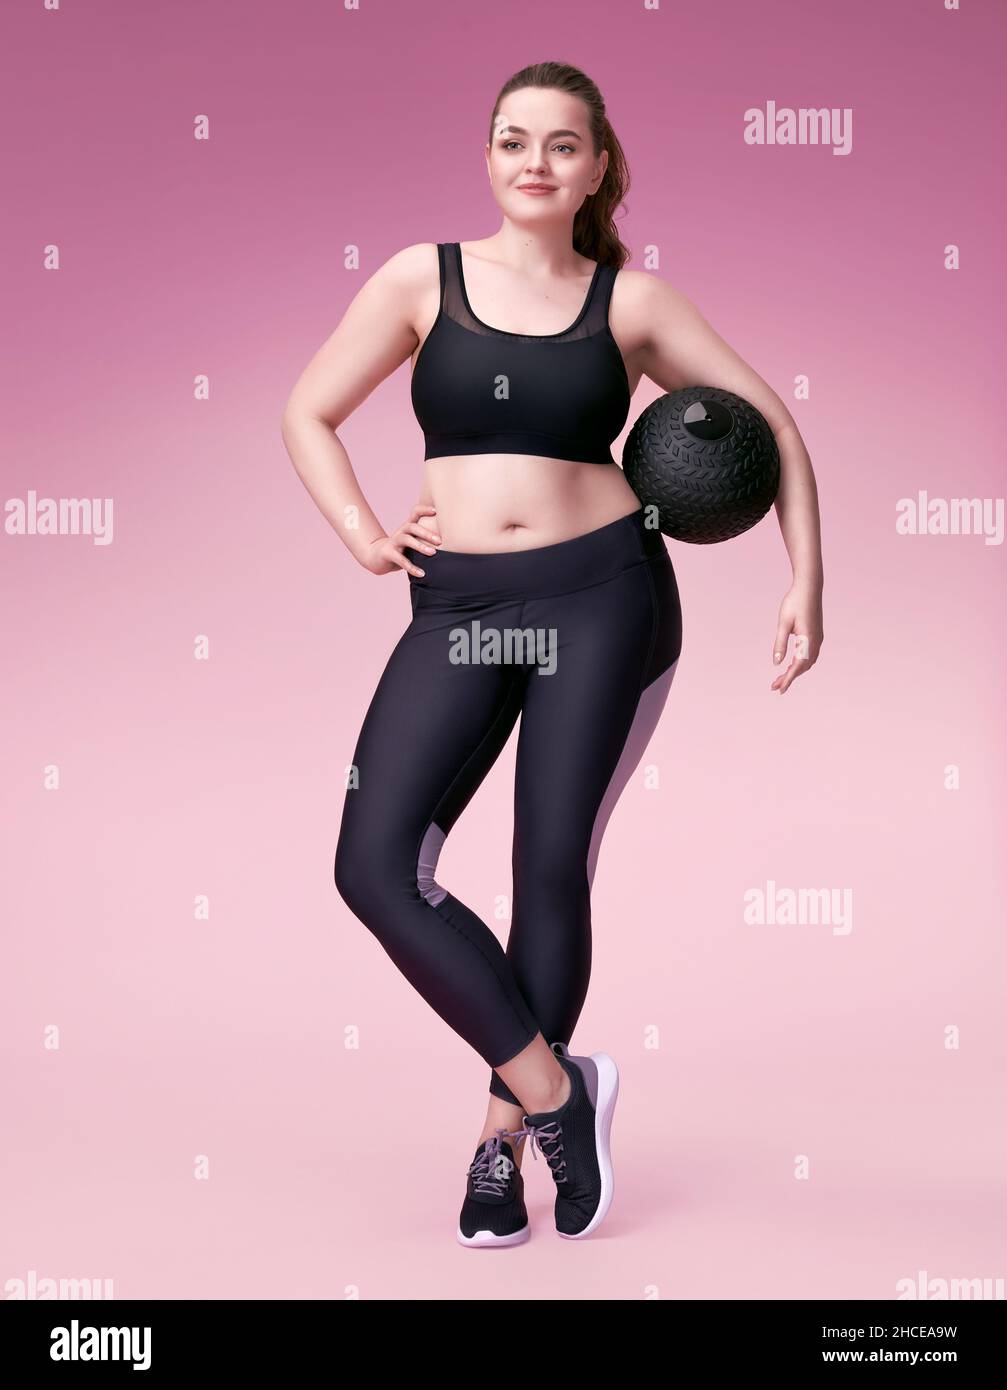 Sporty girl resting after workout with medicine ball. Photo of model with curvy figure in fashionable sportswear on pink background. Sports motivation Stock Photo